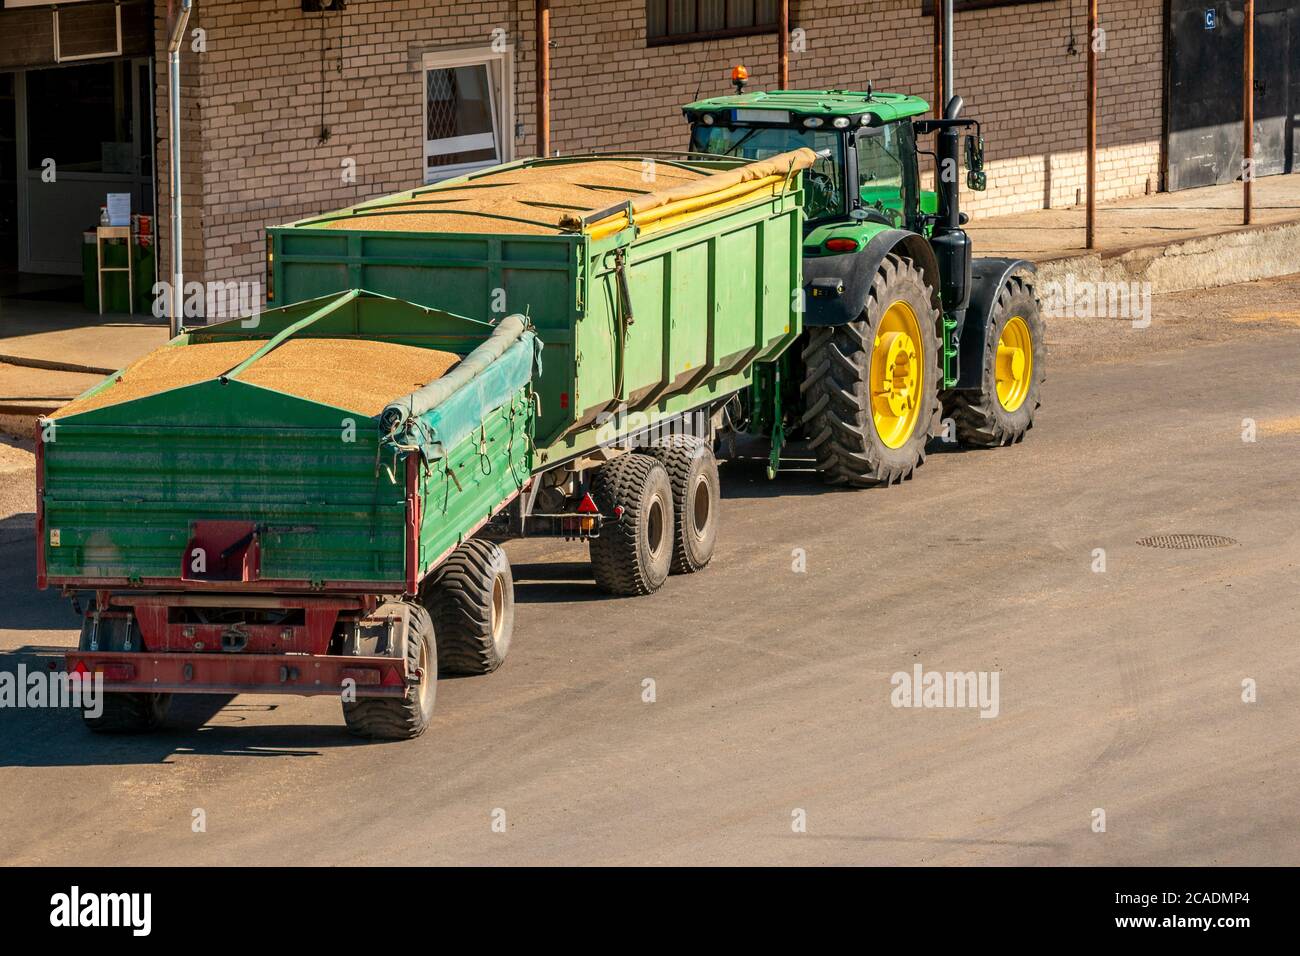 Tractor & trolley filled with wheat grain after wheat crop harvesting. Delivering recently harvested grain to grain storage silos. Stock Photo